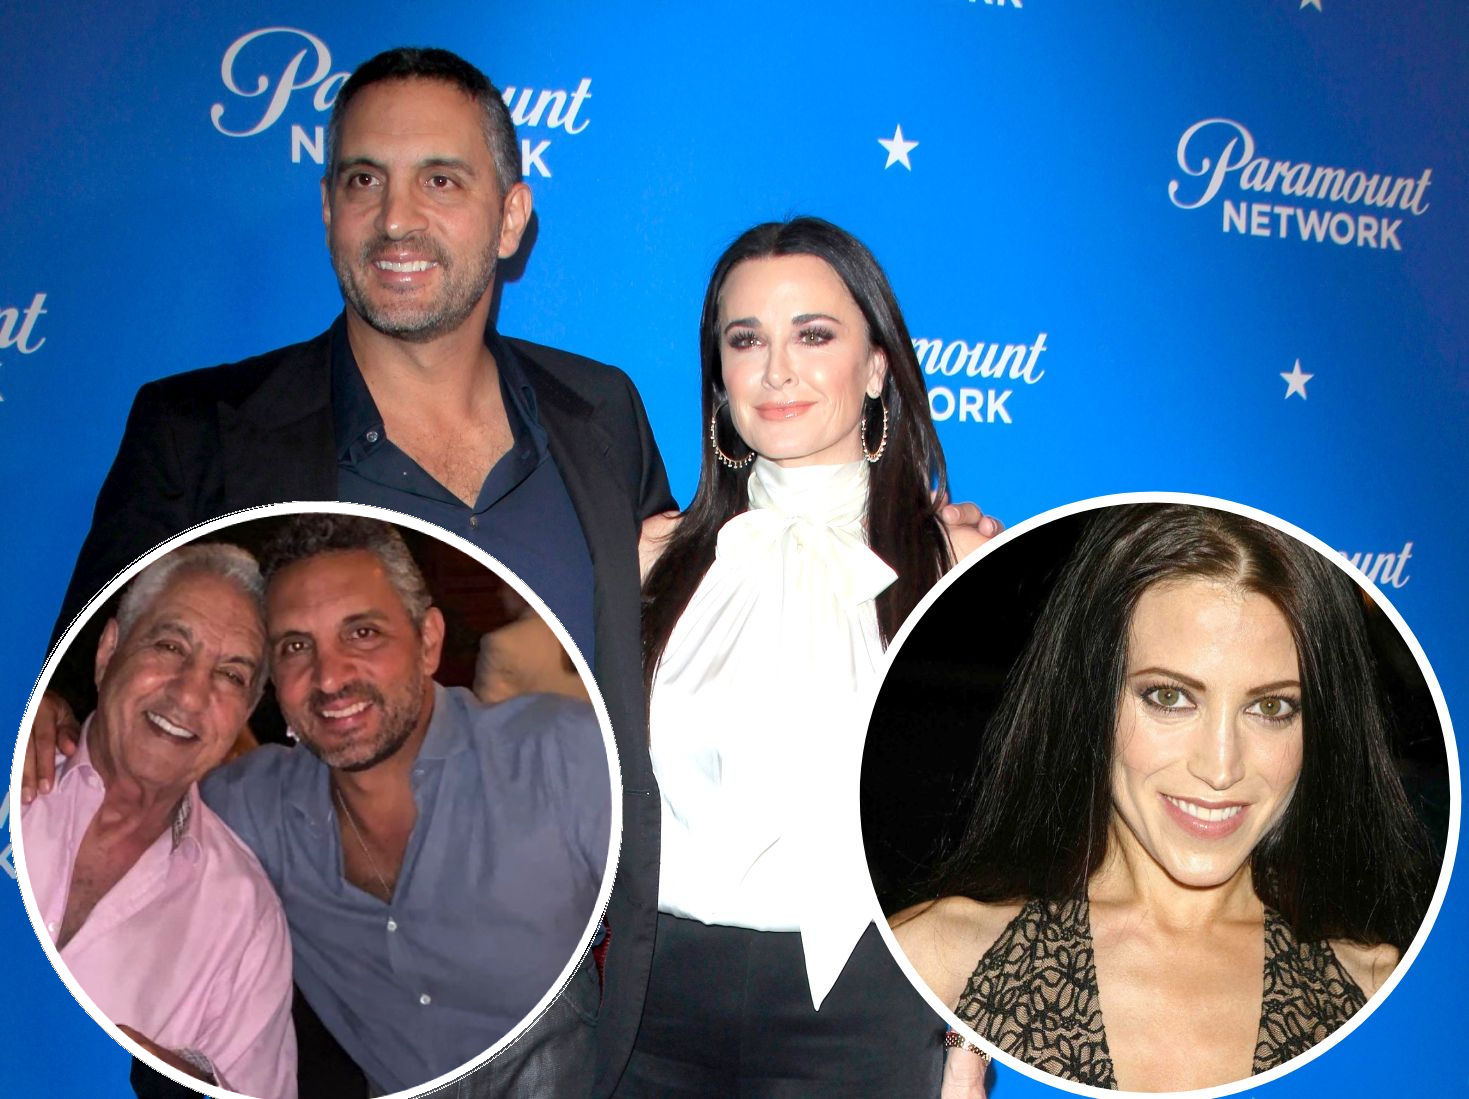 RHOBH Star Mauricio Umansky's Rumored Flame Leslie Bega is Dating His Dad! Plus He Confirms 14-Lb Weight Loss Amid DWTS Stint